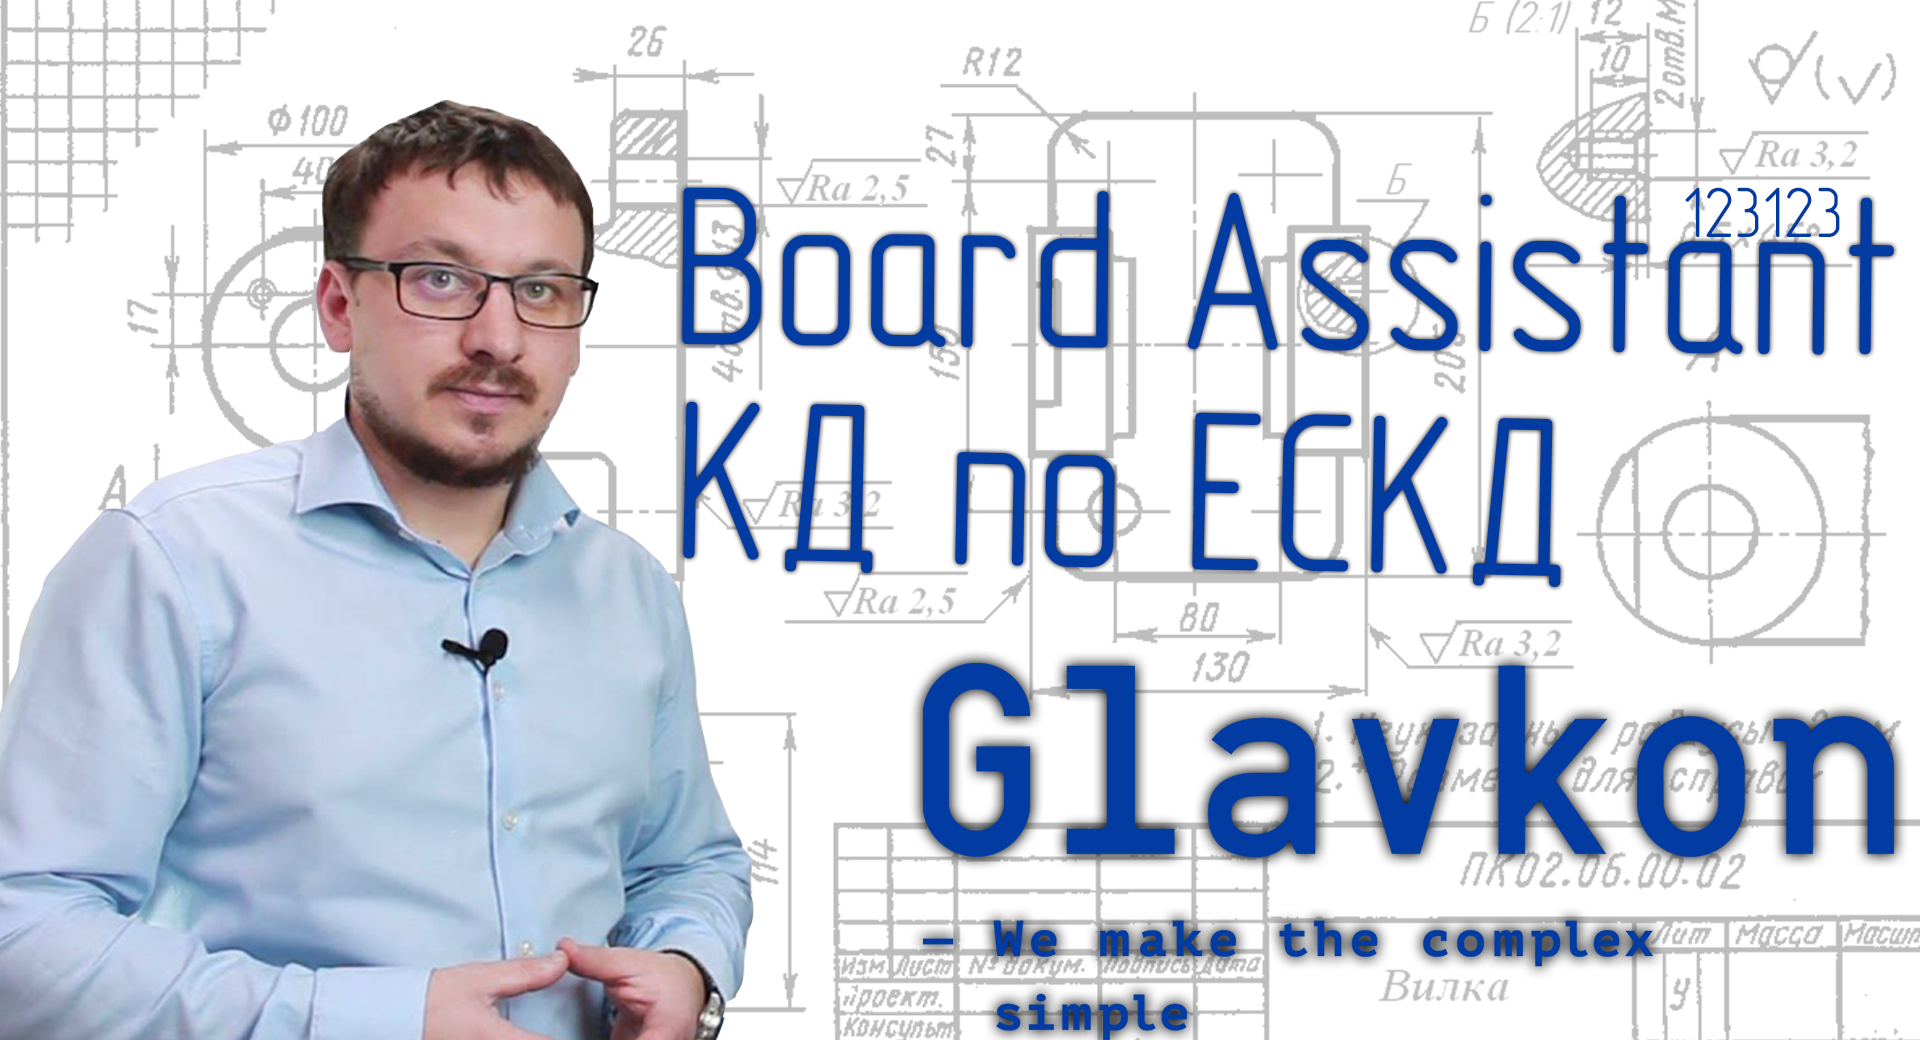 Board assistant